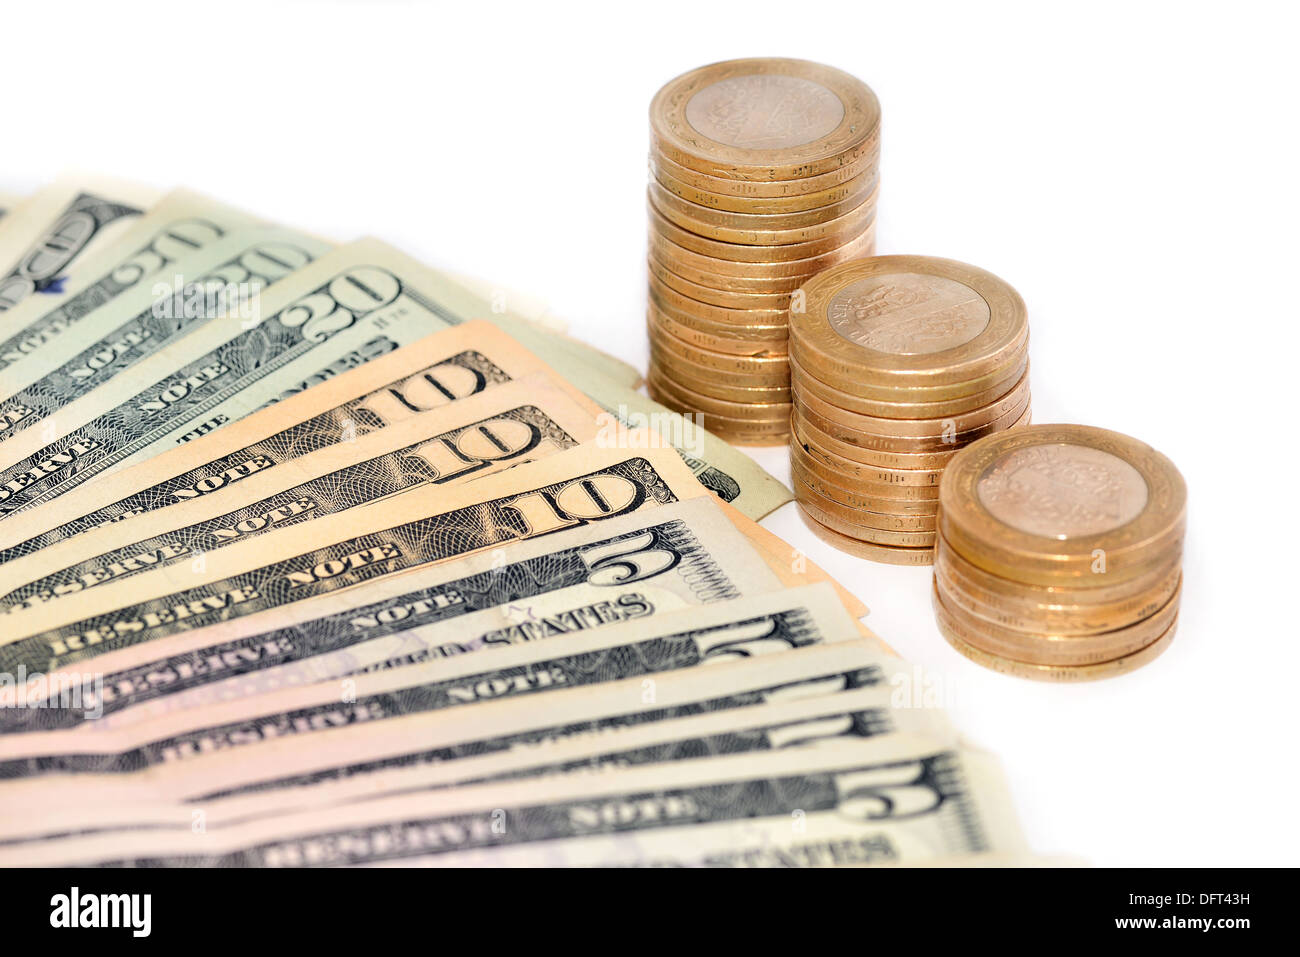 american dollars and coins on the isolated background Stock Photo